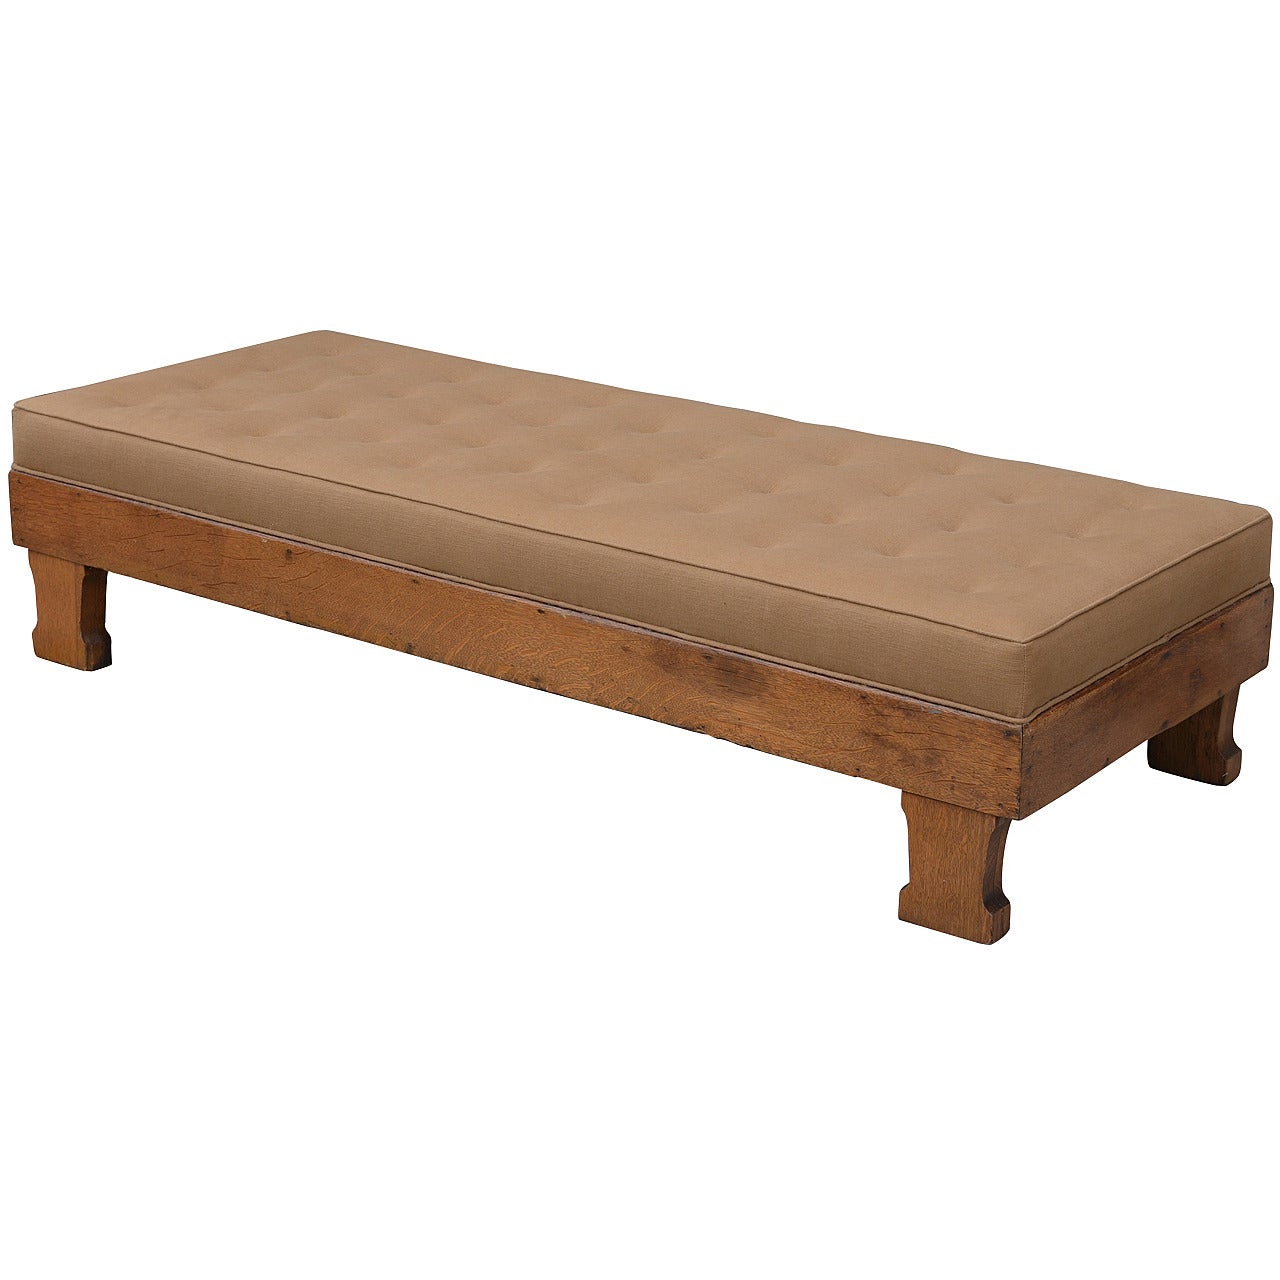 Chic Tufted Linen Arts & Crafts Oak Daybed